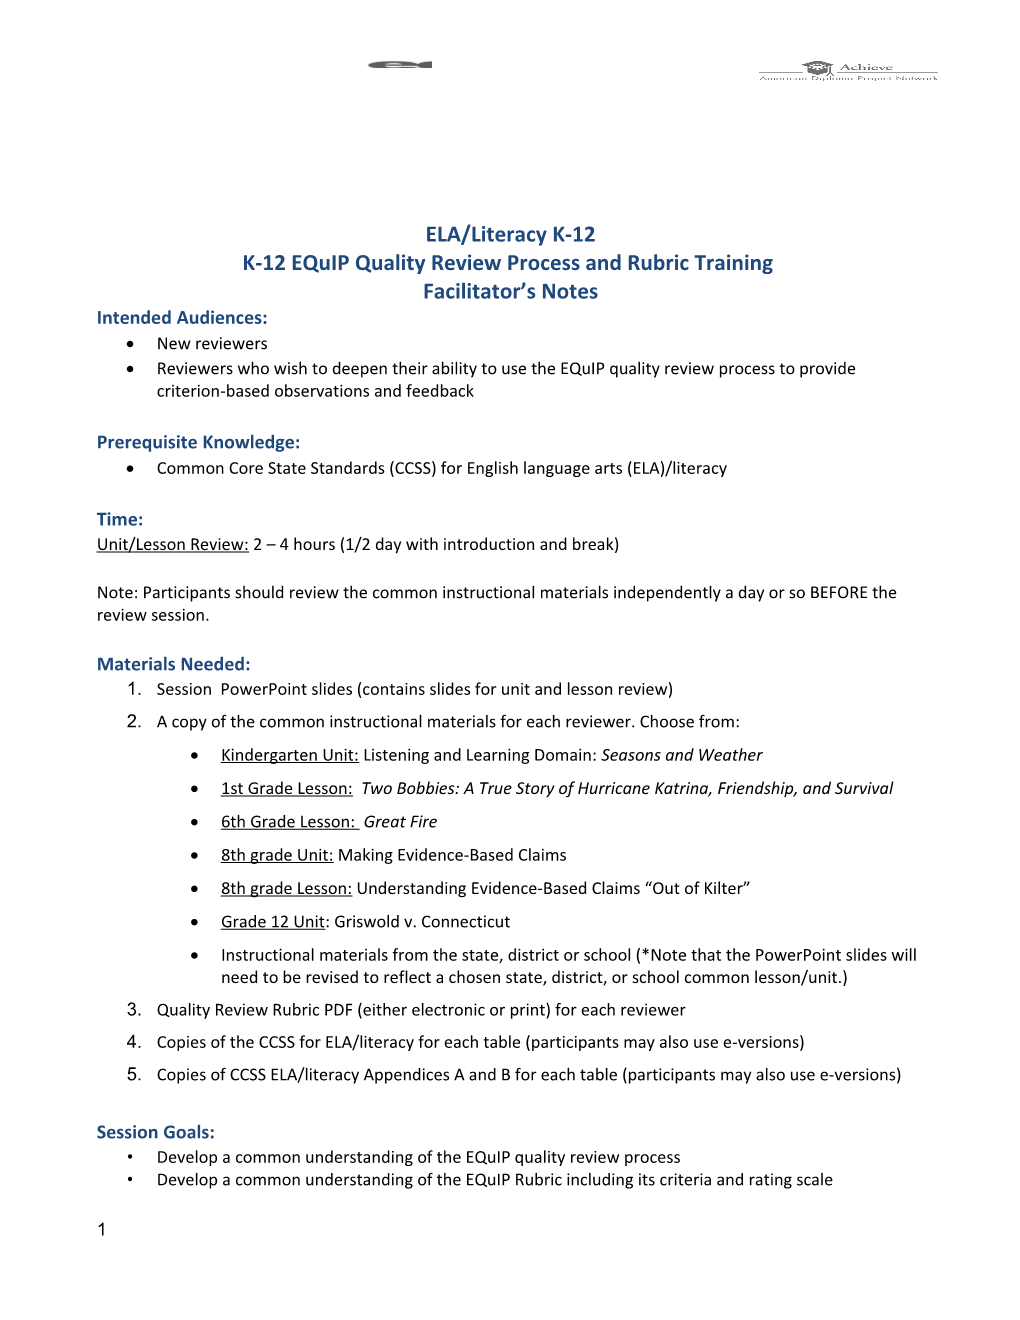 K-12 Equipquality Review Process and Rubric Training